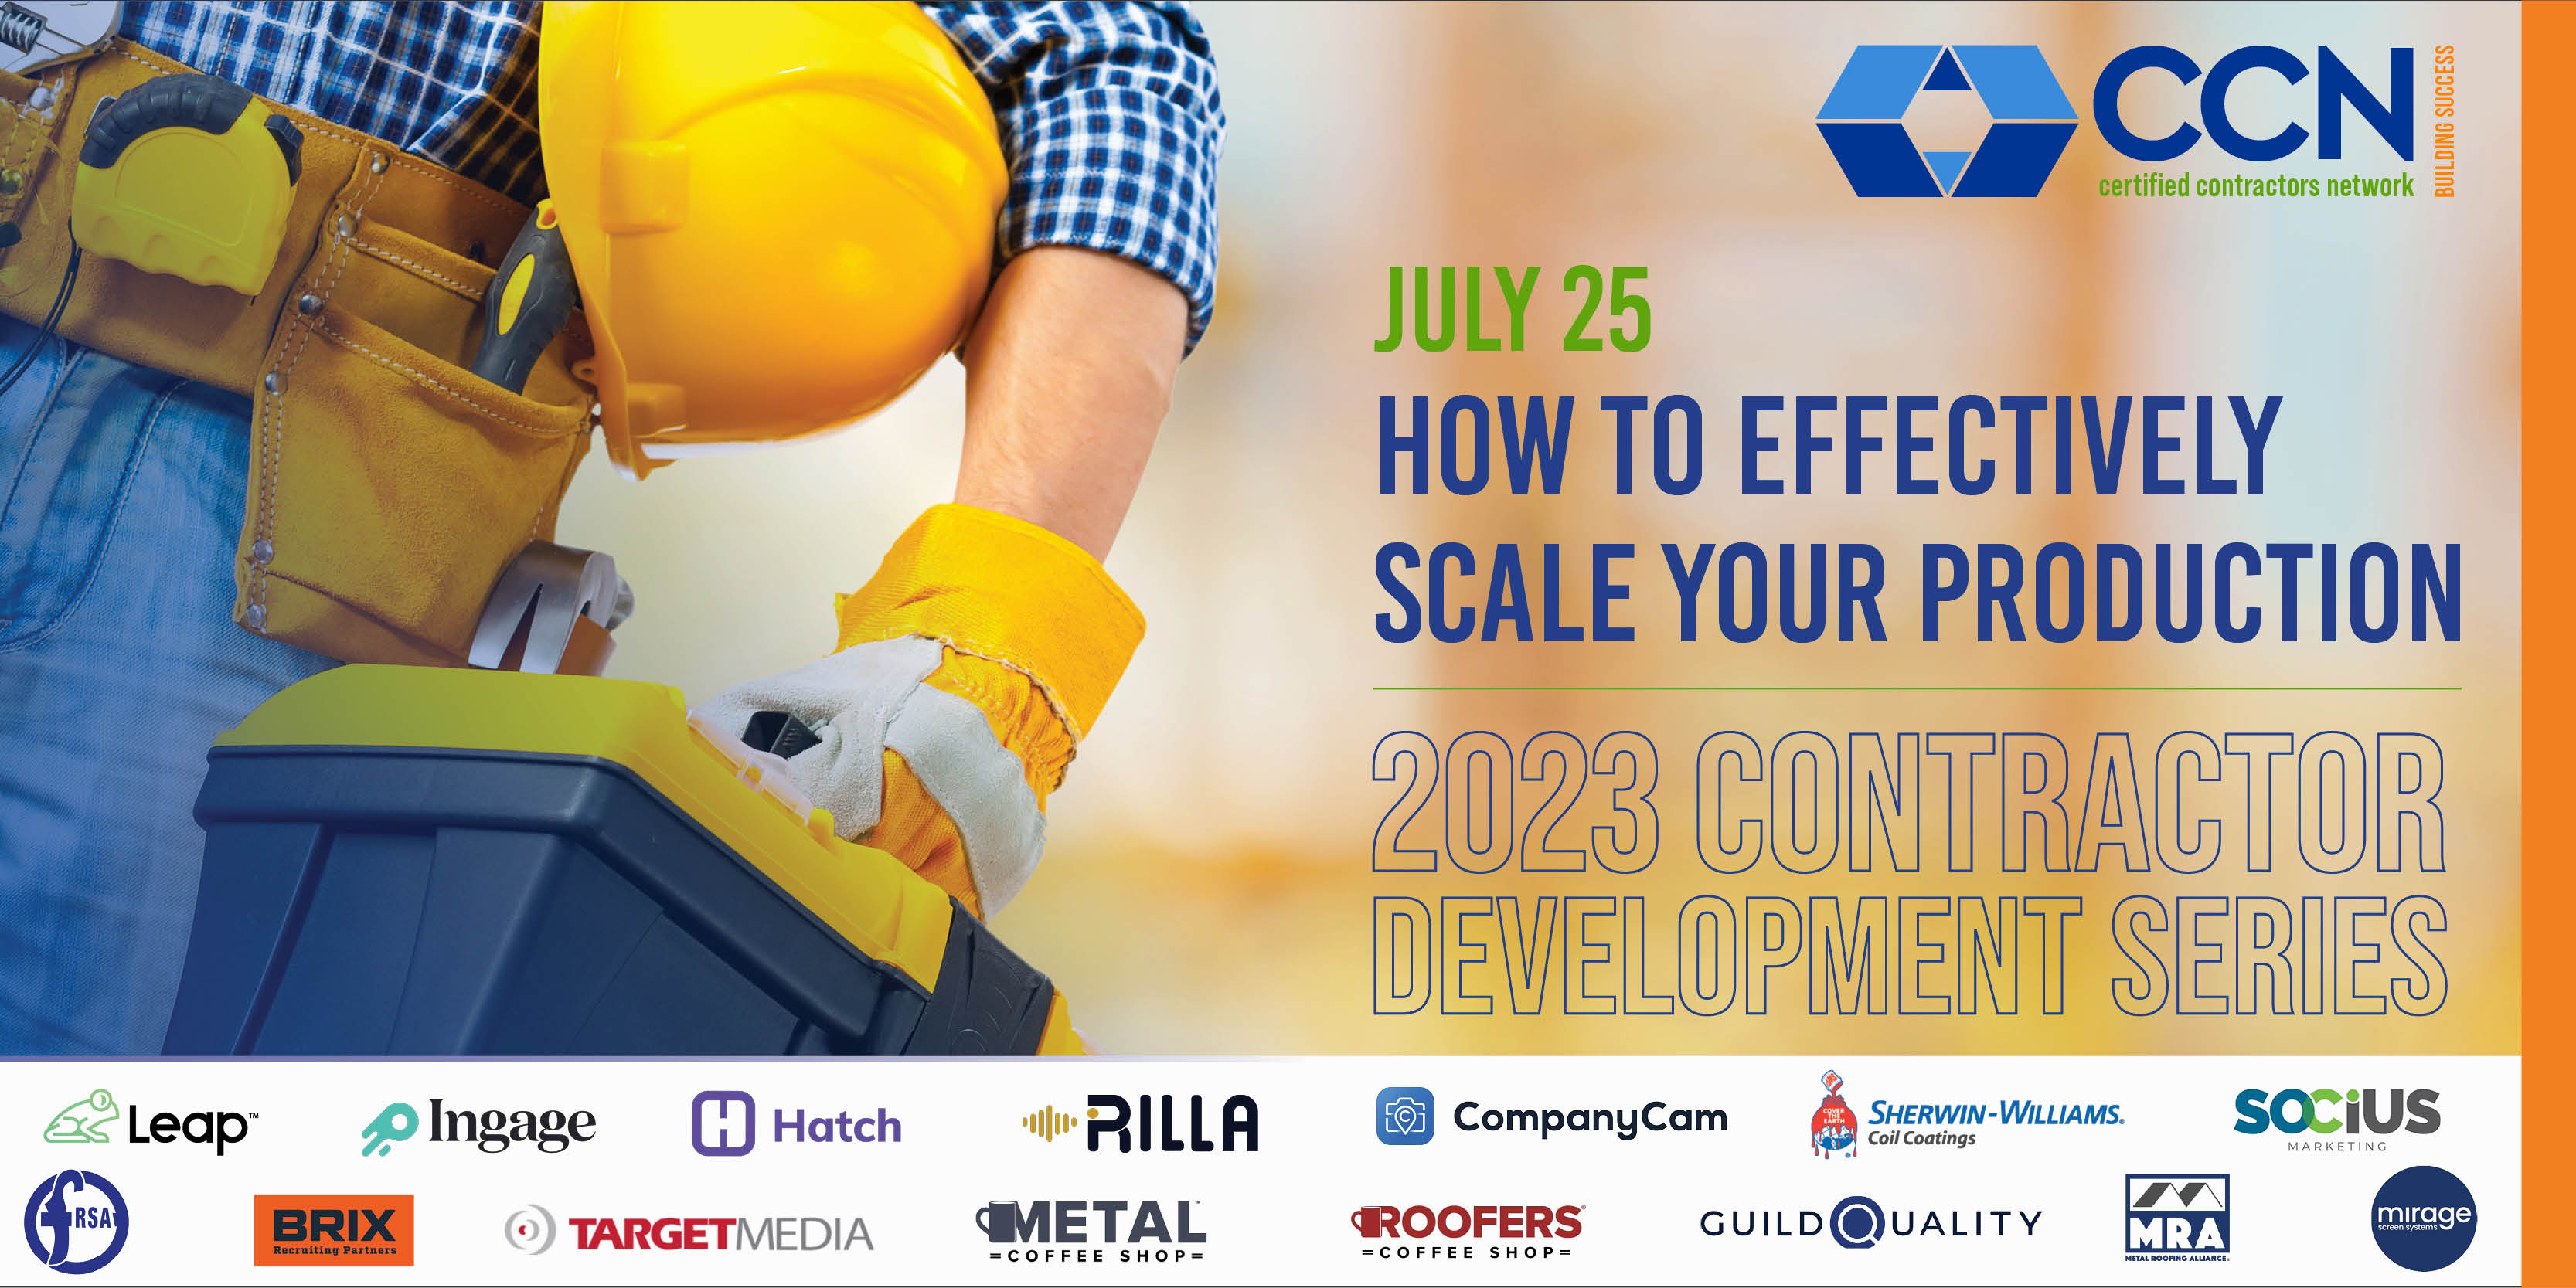 Certified Contractors Network - How to Effectively Scale Your Production